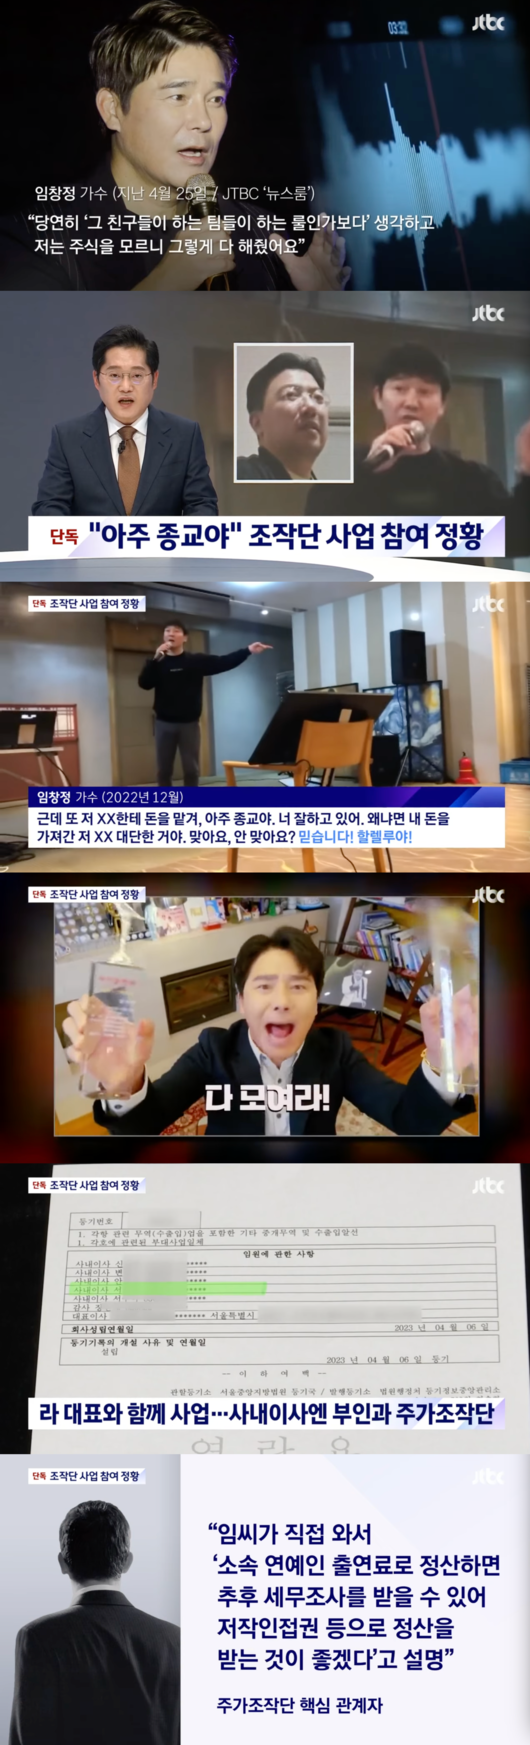 Was Singer Im Chang-jung an event guest who became Victims of Shares Operating Stage? controversy is ongoing.In the JTBC  ⁇  The Newsroom  ⁇  broadcast on the 1st, the anchor  ⁇  Im Chang-jung claims that Jasin is also Shares Falsify Victims, but the additional footage we have secured is not like a simple investment.He said Religion was the representative of the investment adviser, and Hallelujah came out.Im Chang-jung, who took the microphone in front of a lot of people, is very Religion. You are doing well.Because the XX that took my money is great. Yes, is not it right?He said, I will give you a month until the end of next month. If you do not give me as much profit as you want, I will dissolve it. Yes, it does not fit. Great Religion is born like this.Investors who attended also shouted  ⁇ Hallelujah ⁇ .Even The Newsroom has raised suspicions that Im Chang-jung went beyond simple investment and went ahead with the Shares operating stage.Im Chang-jung has set up an entertainment company with Mr. Rahdok-yeon, and Im Chang-jungs wifes name and Shares operating stage officials are listed on the companys registered director.The newsroom also said there was evidence that Im Chang-jung directly proposed the commissions payment method.Im Chang-jung, who borrowed the words of a key official, explained that if he came directly and settled with his Celebrity performance fee, he would be able to receive a tax investigation later and receive a settlement by authorship.In an interview with JTBC, Im Chang-jung said, It was true that I made some Misunderstood remarks for the meeting atmosphere at the time, but I did not encourage Investment.The Commissions settlement proposal is also different from the facts.In addition, Im Chang-jung bought 3 billion won worth of  ⁇  shares, but 8.4 billion won (approximately due to credit purchases) disappeared. Both were cut in half, and there were 189 million won left in the account, adding, This was worth 2 billion won two days ago.There was 2 billion won in the account, but now there are 189 million won left, and Jasin appealed to Victims, not Shares Falsify Accomplice.Previously, Im Chang-jung made it clear that it is different from the facts about the allegations of SharesFalsify involvement in several broadcasters through the official position, and the law firm representing him also participated in the 1 trillion celebration party or Investment recommendation I am opposed to raising suspicions.Im Chang-jung said, I would like to ask you to refrain from the exaggerated and speculative reports of Misunderstood.I will be able to talk about all the suspicions at the end of the day as soon as possible. DB, The Newsroom.